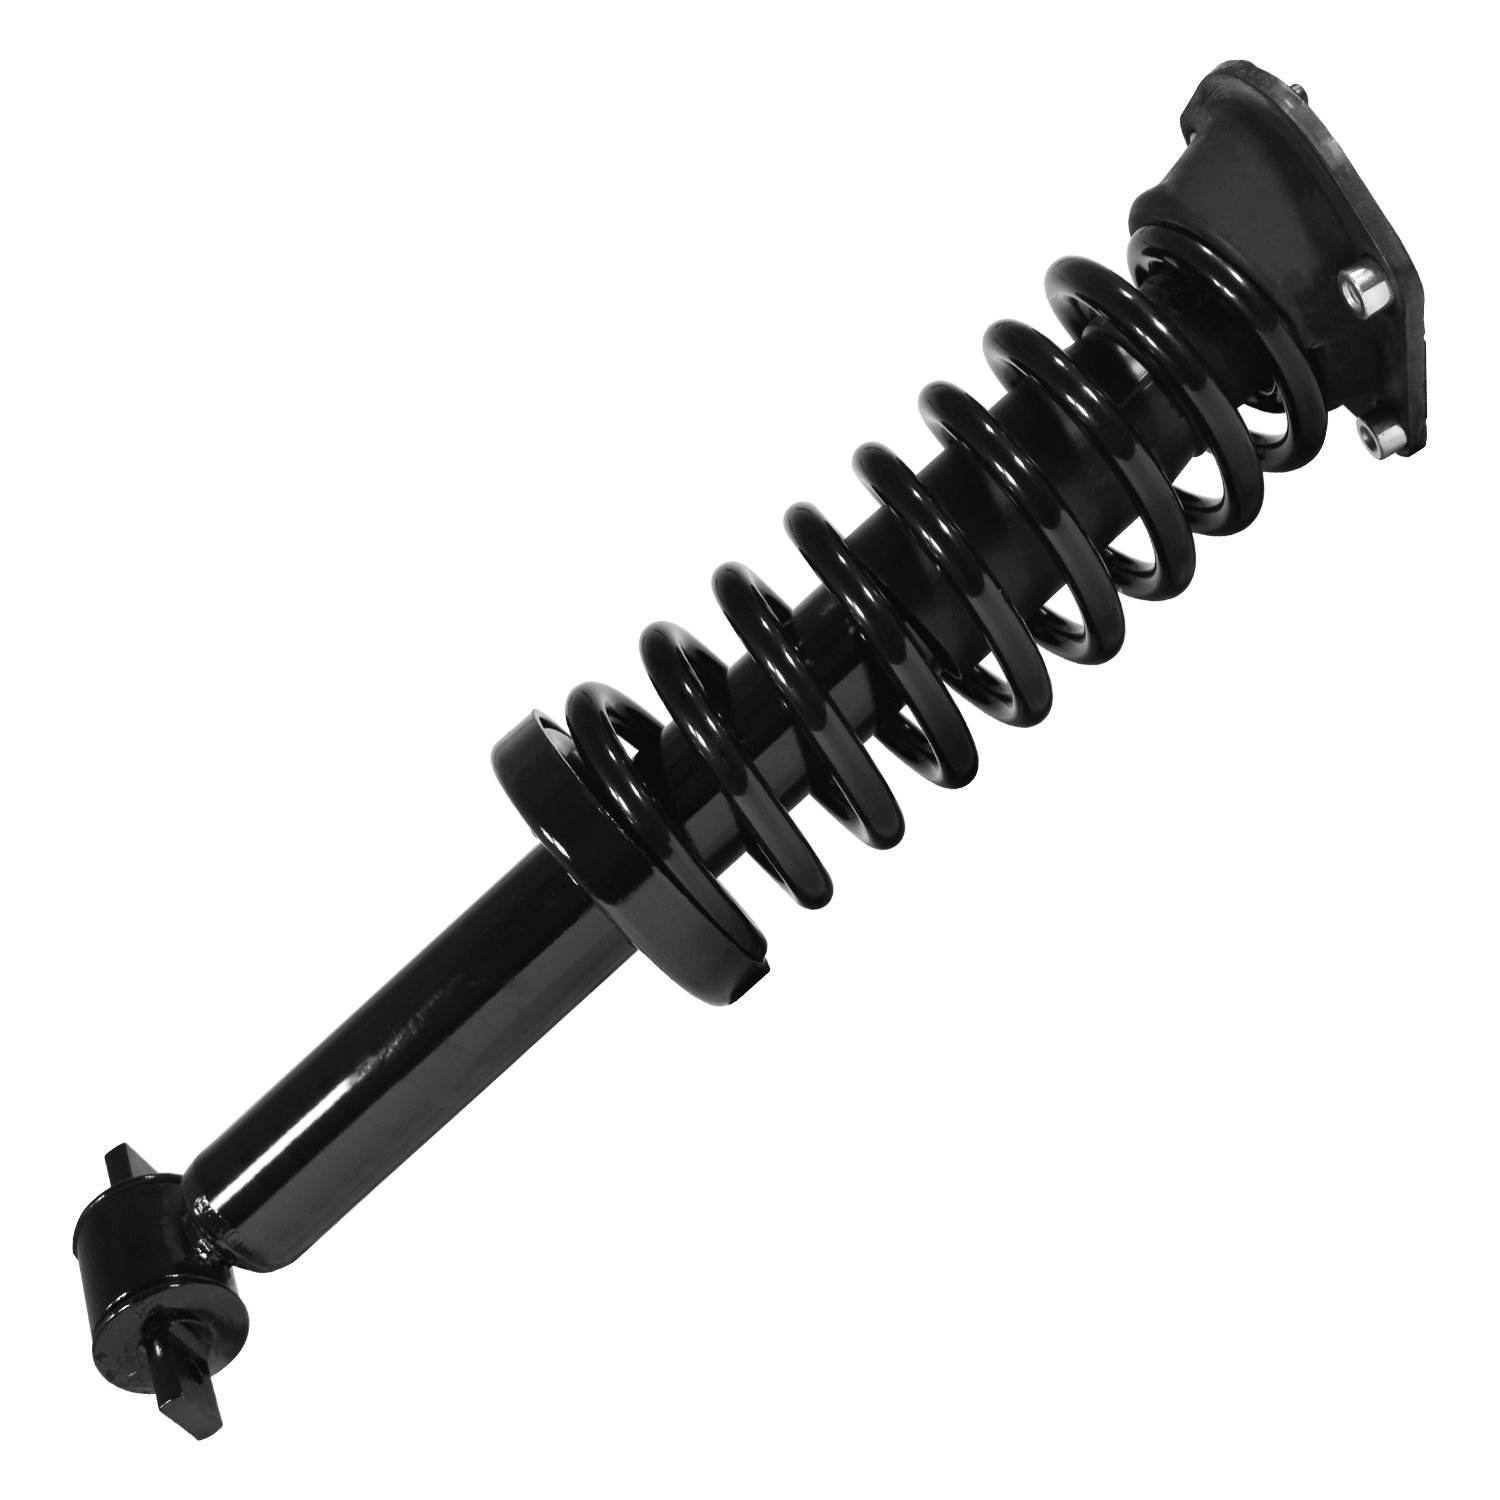 11993 Suspension Strut & Coil Spring Assembly Fits Select Chevy Camaro, Pontiac Firebird